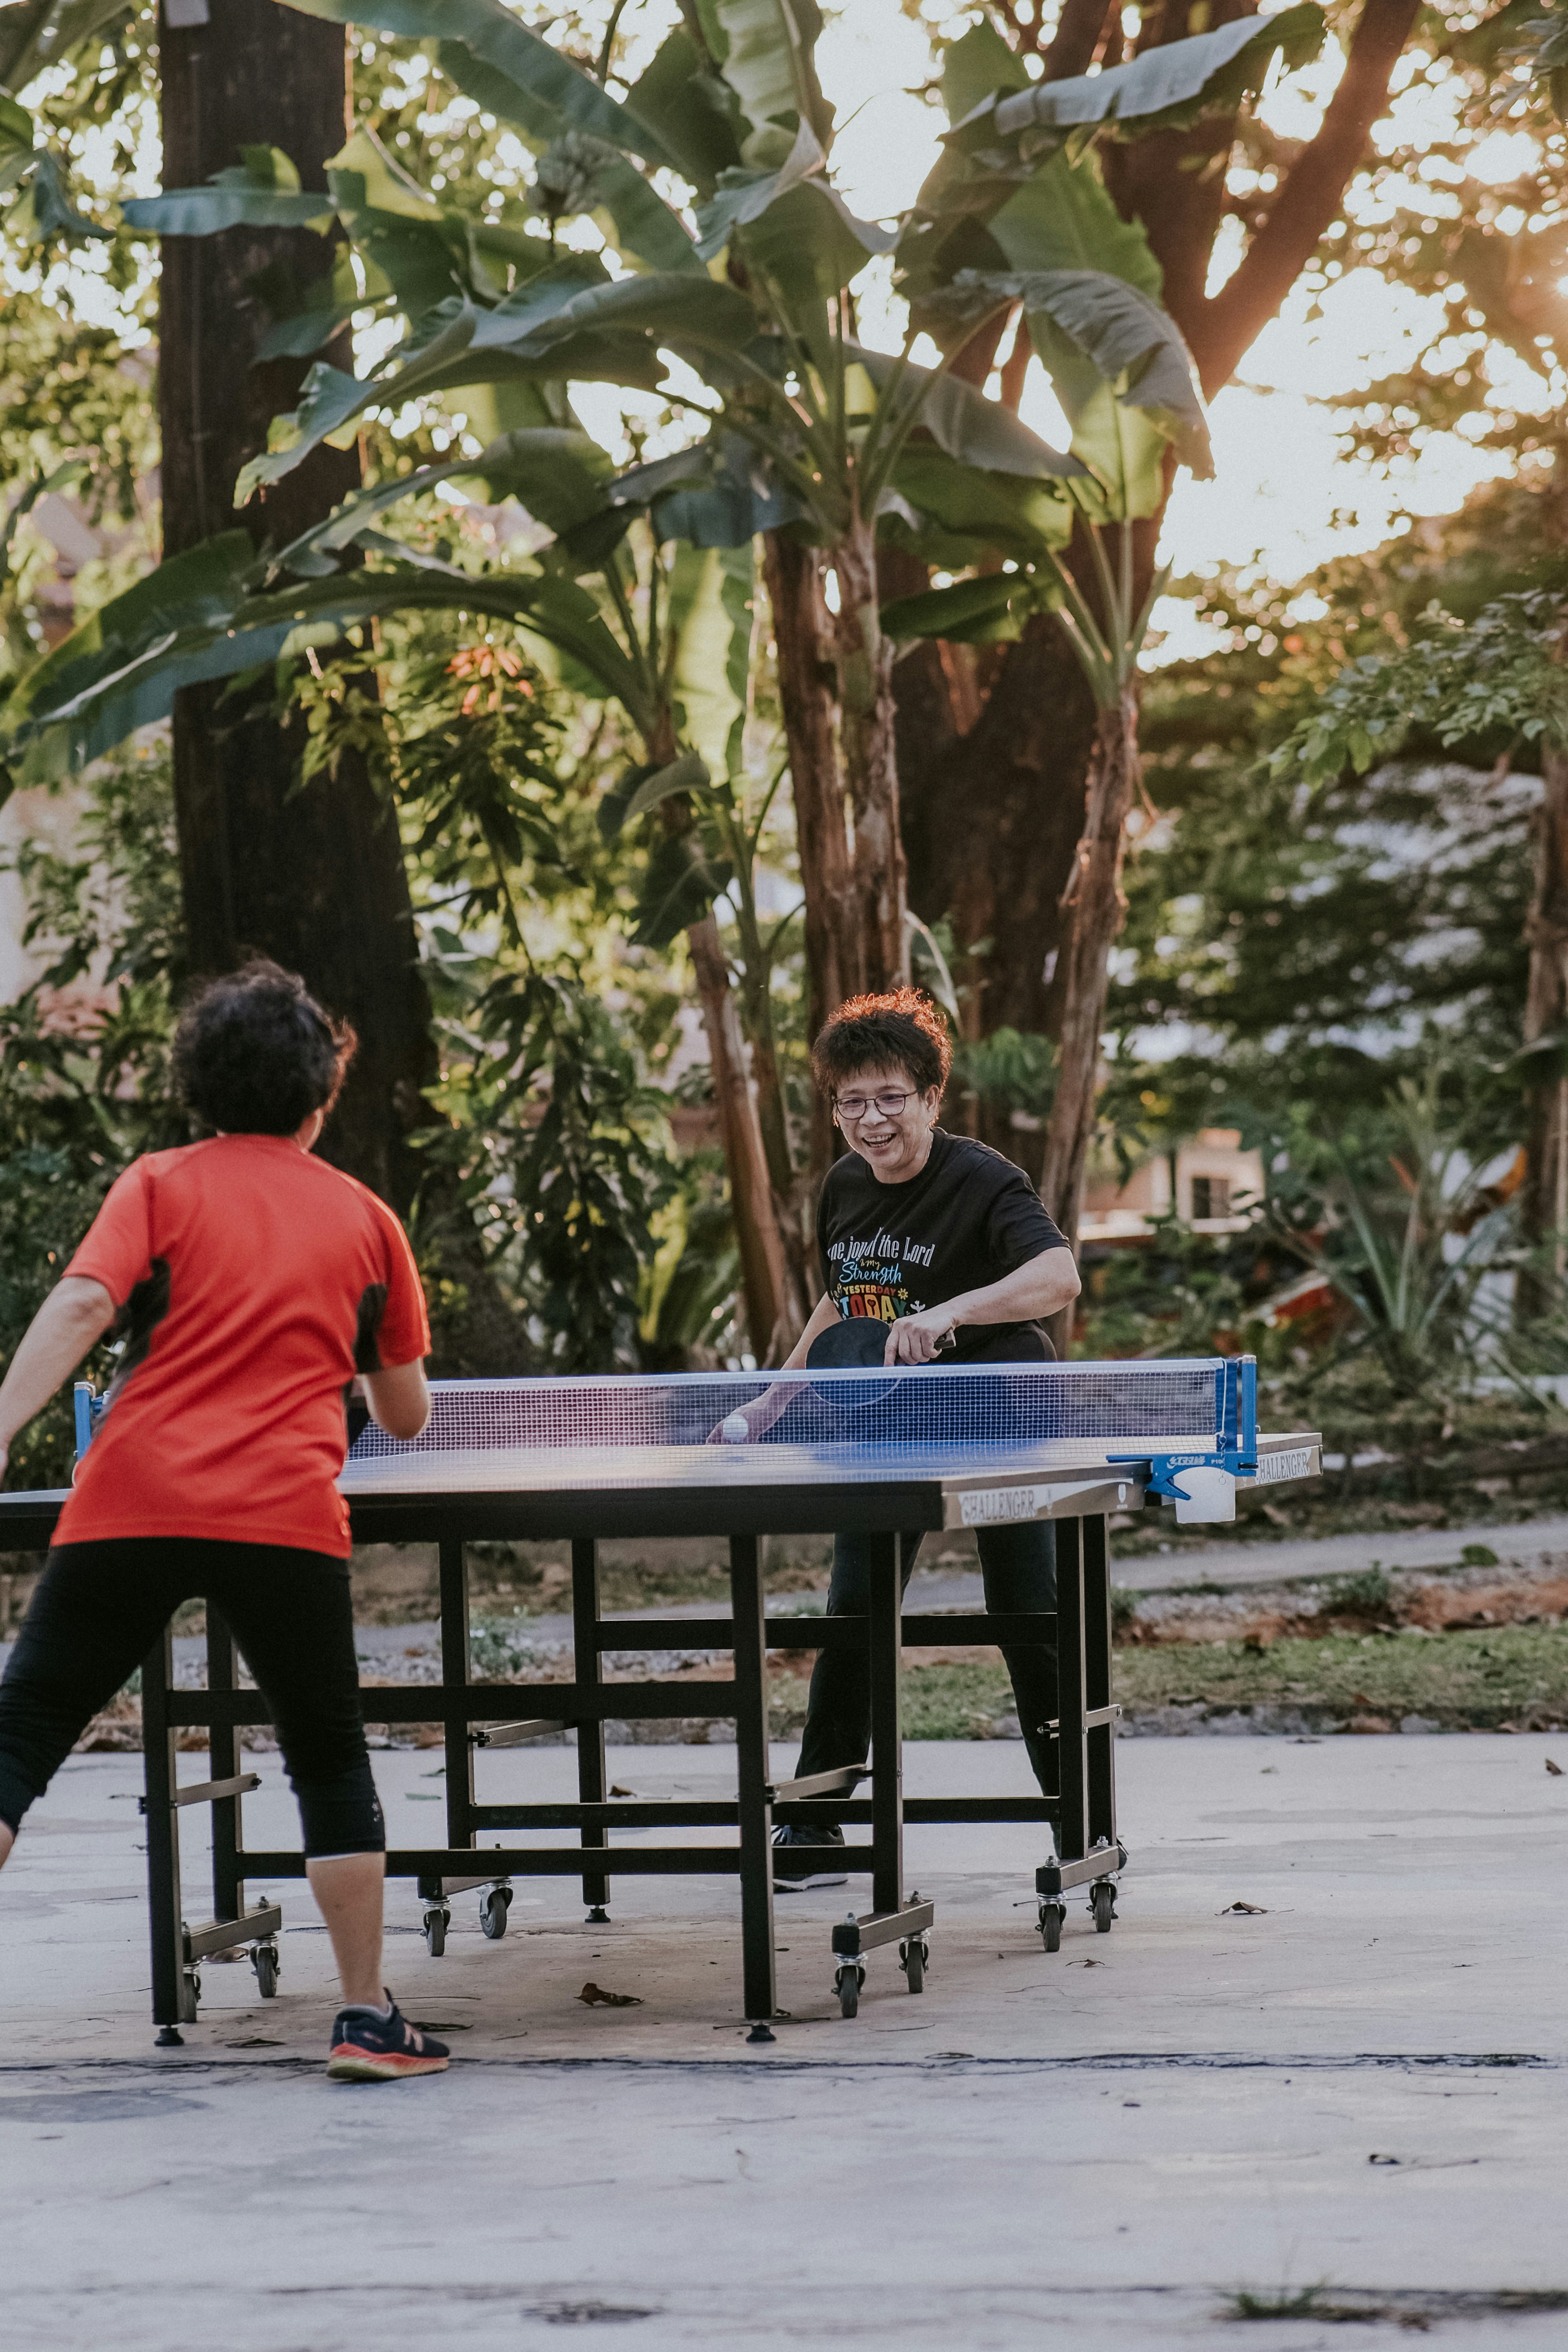 Chinese elderly woman playing table tennis/ping pong in a park in Malaysia. 